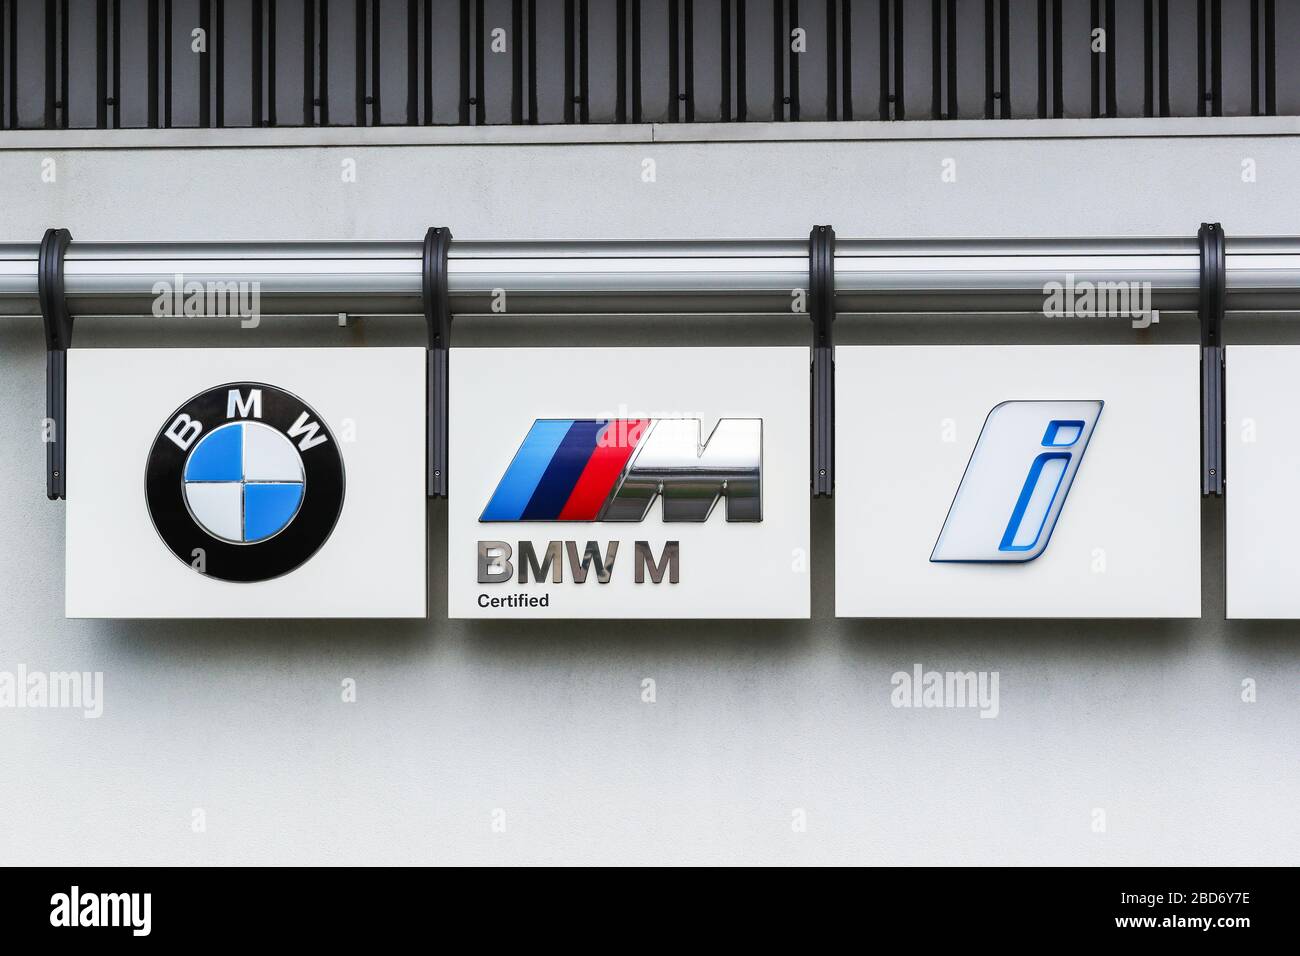 BMW logos showing the standard company logo, the M sport logo and the new electric vehicle 'I' logo, mounted outside a BMW dealership, Ayrshire, UK Stock Photo